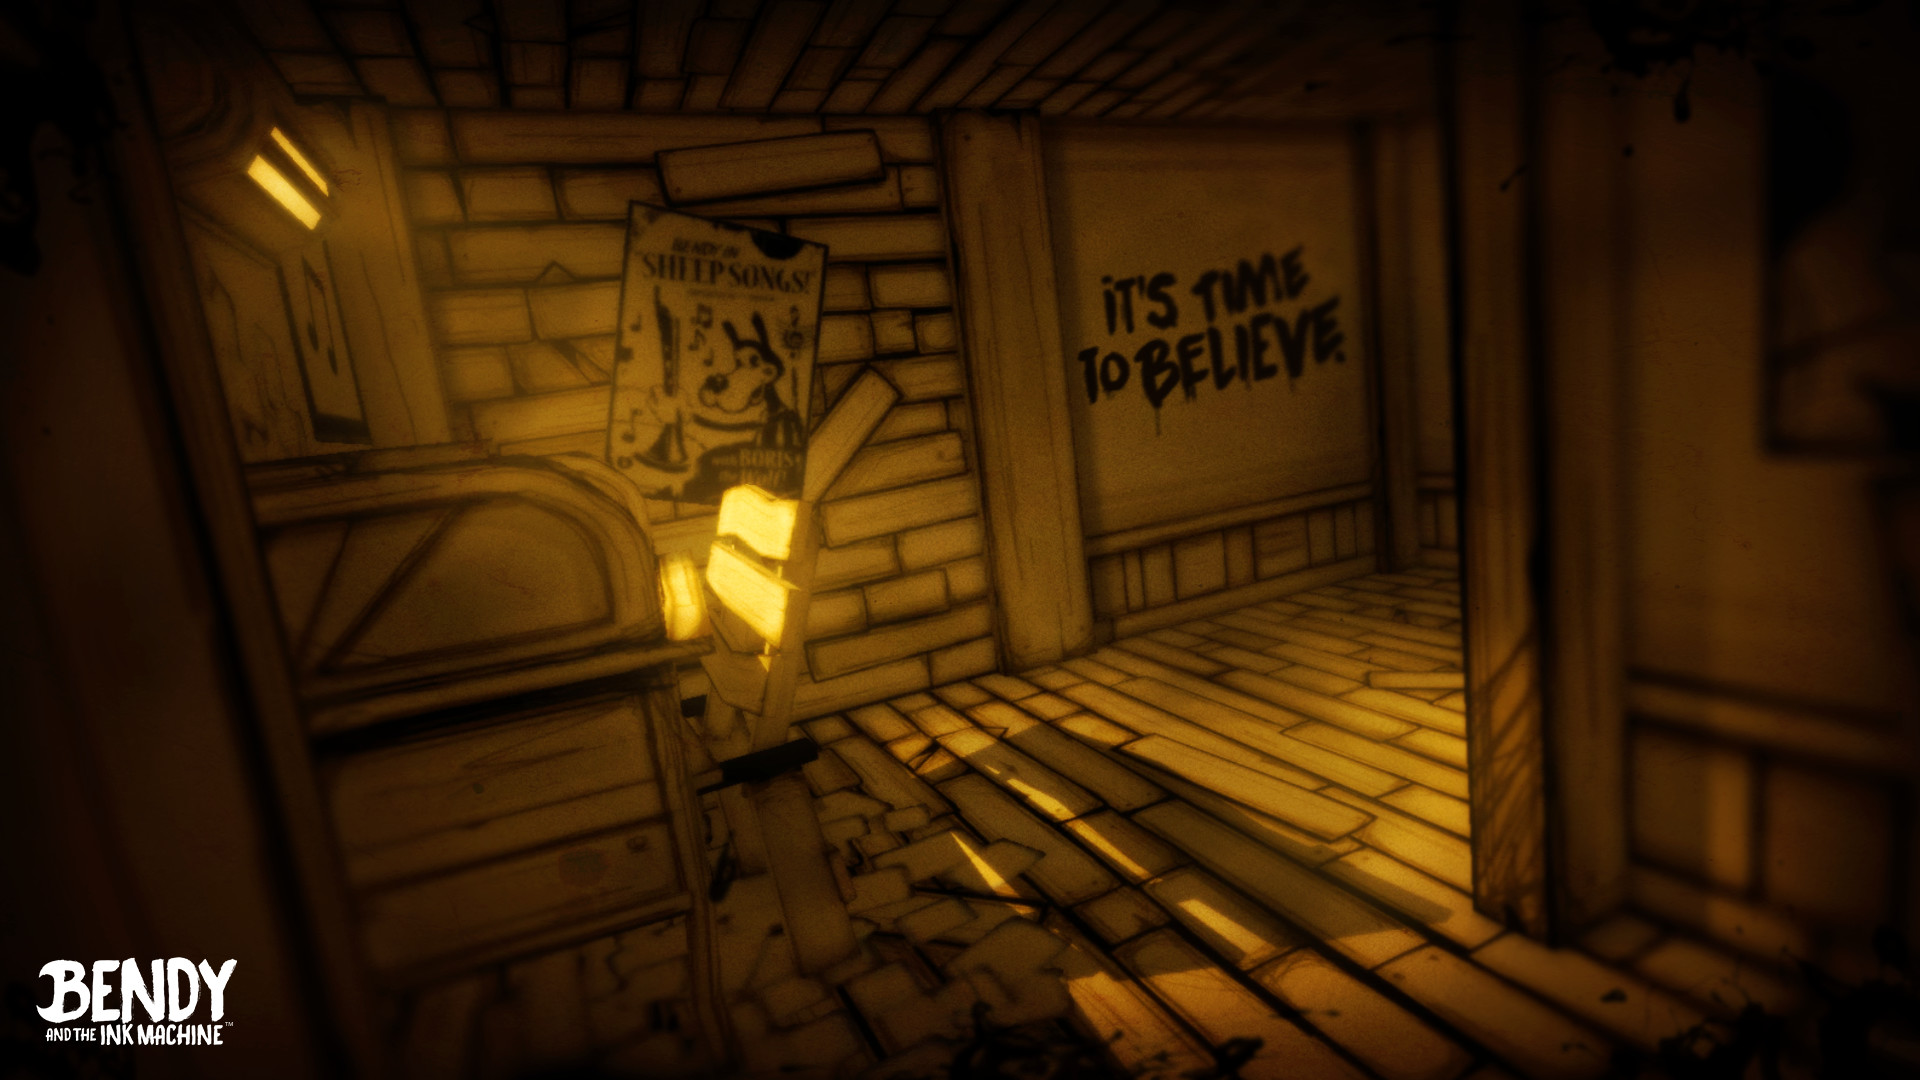 Bendy and the Ink Machine Chapter 4 Torrent Download - CroTorrents